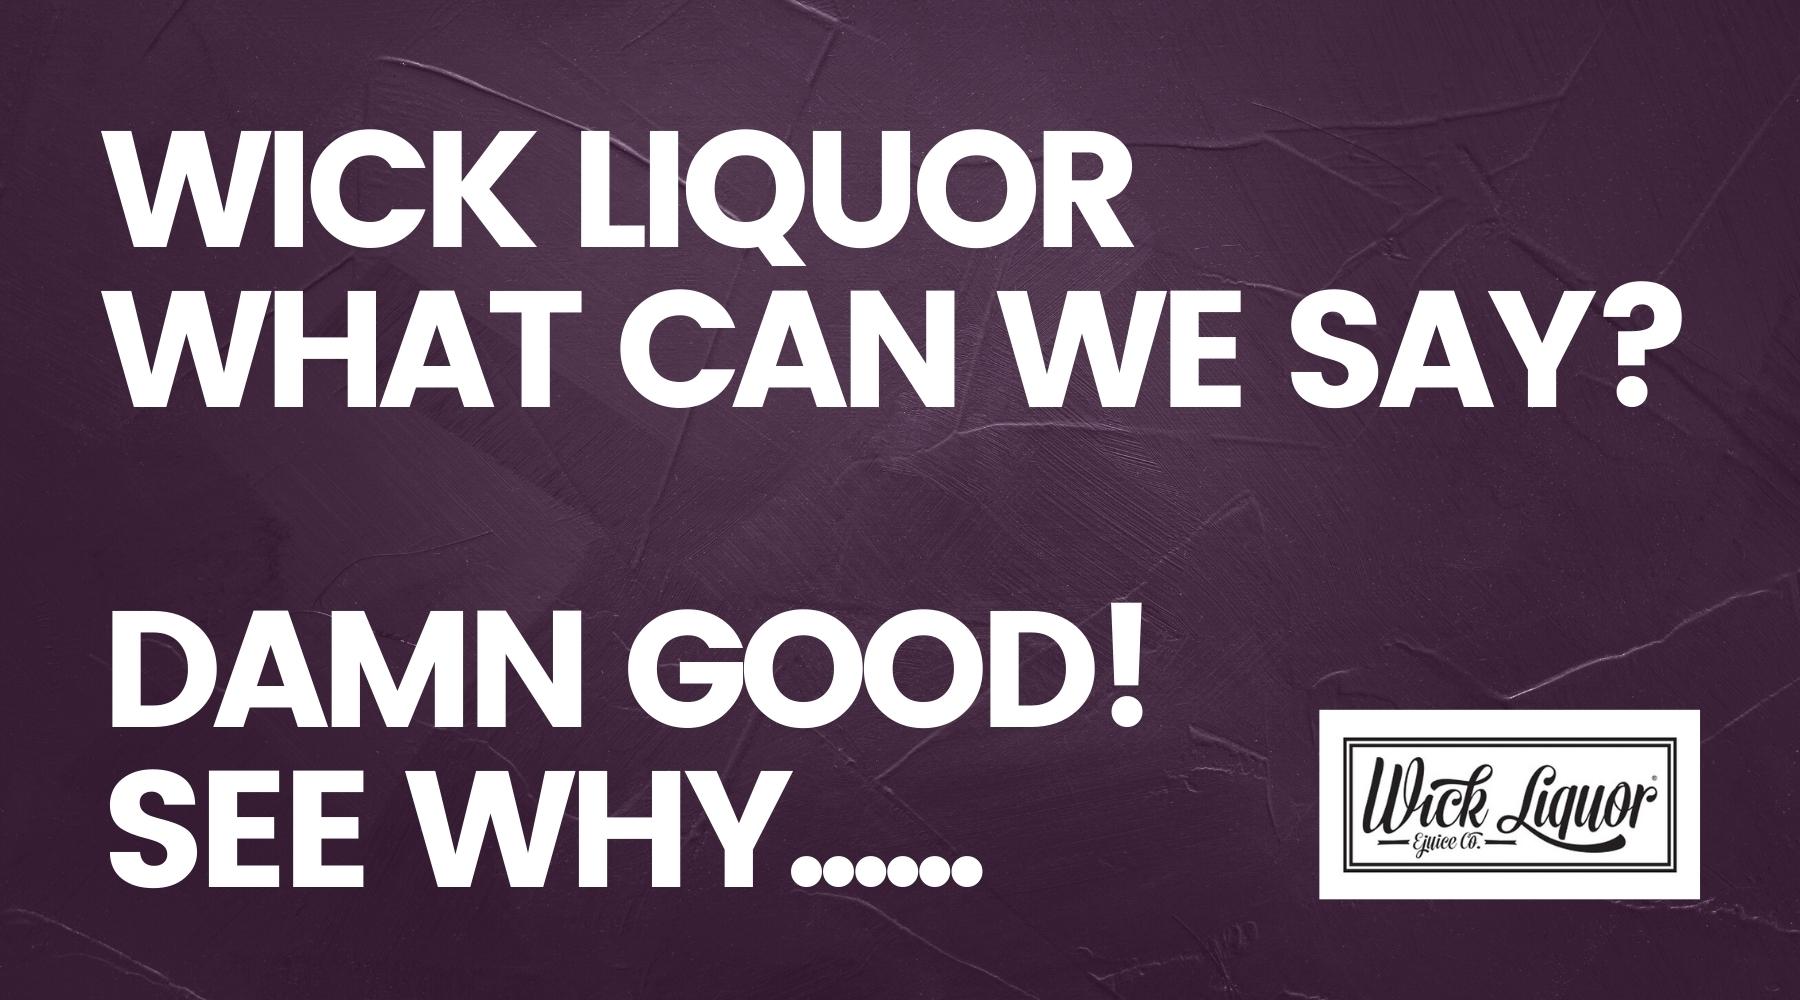 You can buy Wick Liquor E-liquids. Shortfills and Nic Salts at Vape Direct. But why should you buy them? what makes them so good? we investigate further and share some of our own thoughs on this well know UK brand